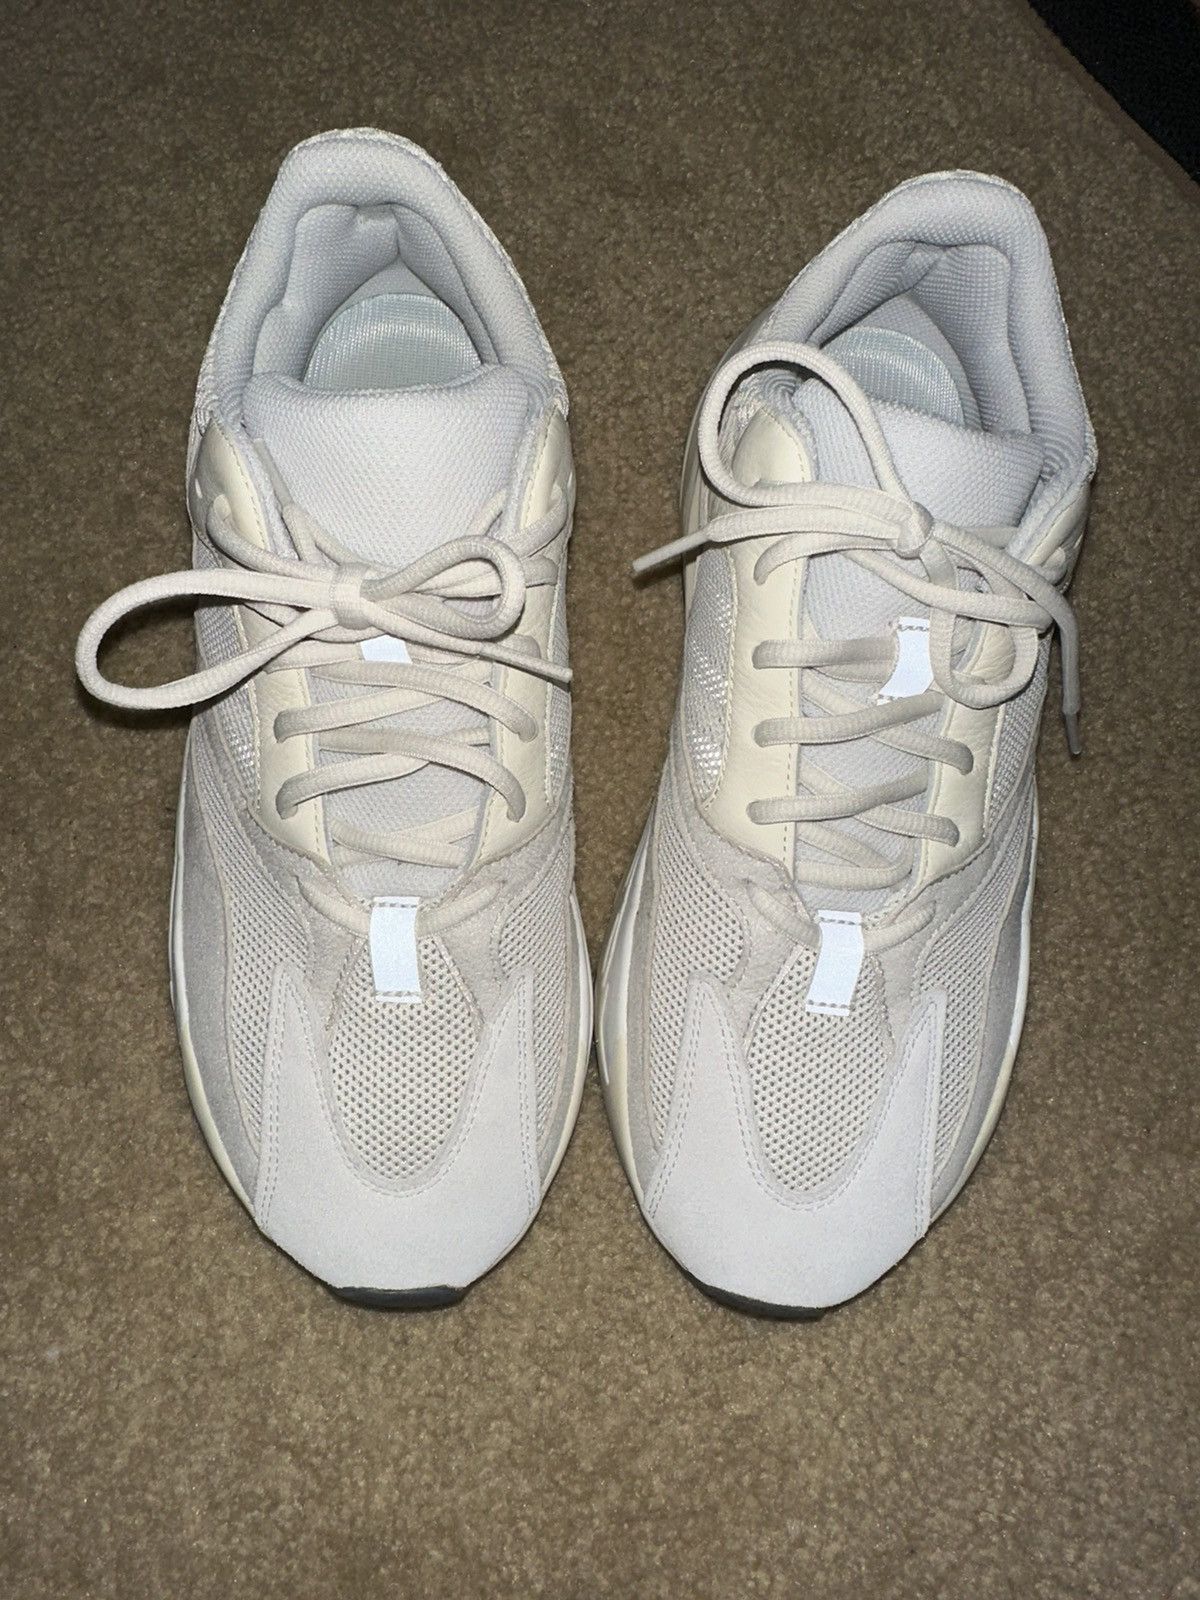 Pre-owned Adidas X Kanye West Adidas Yeezy 700 Analog Size 11 Shoes In White